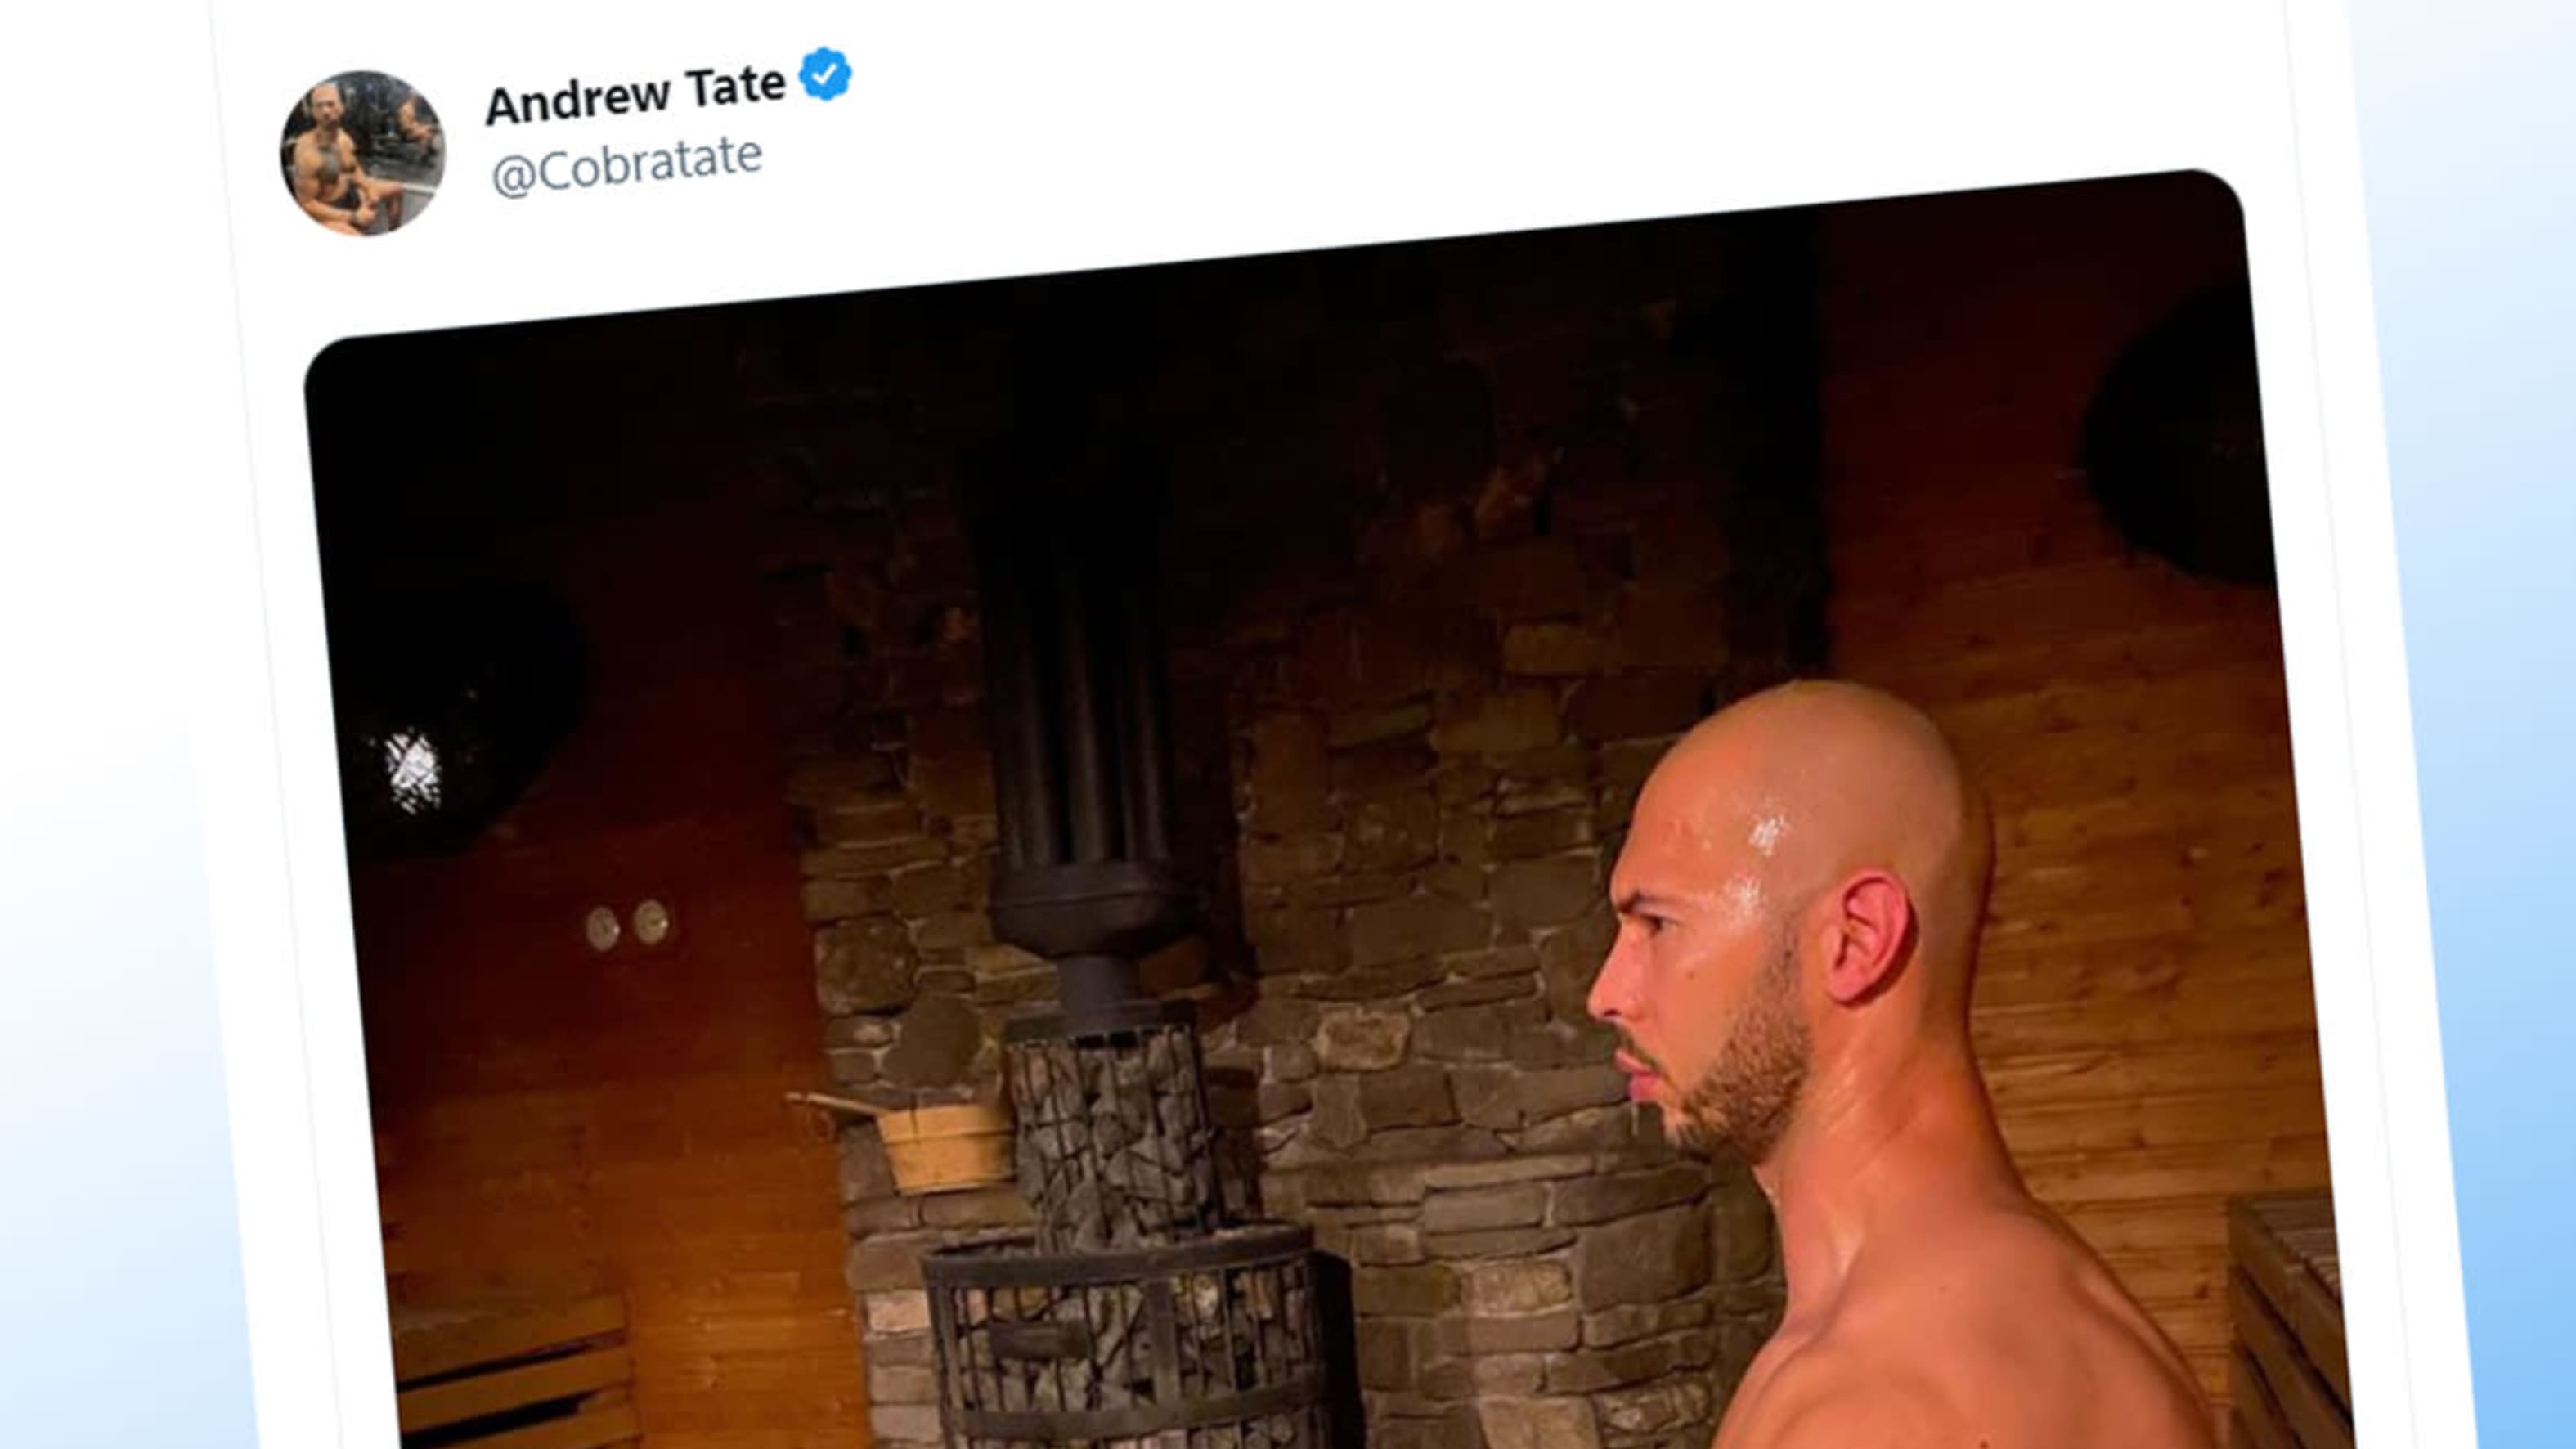 Controversial influencer Andrew Tate marks Twitter return with